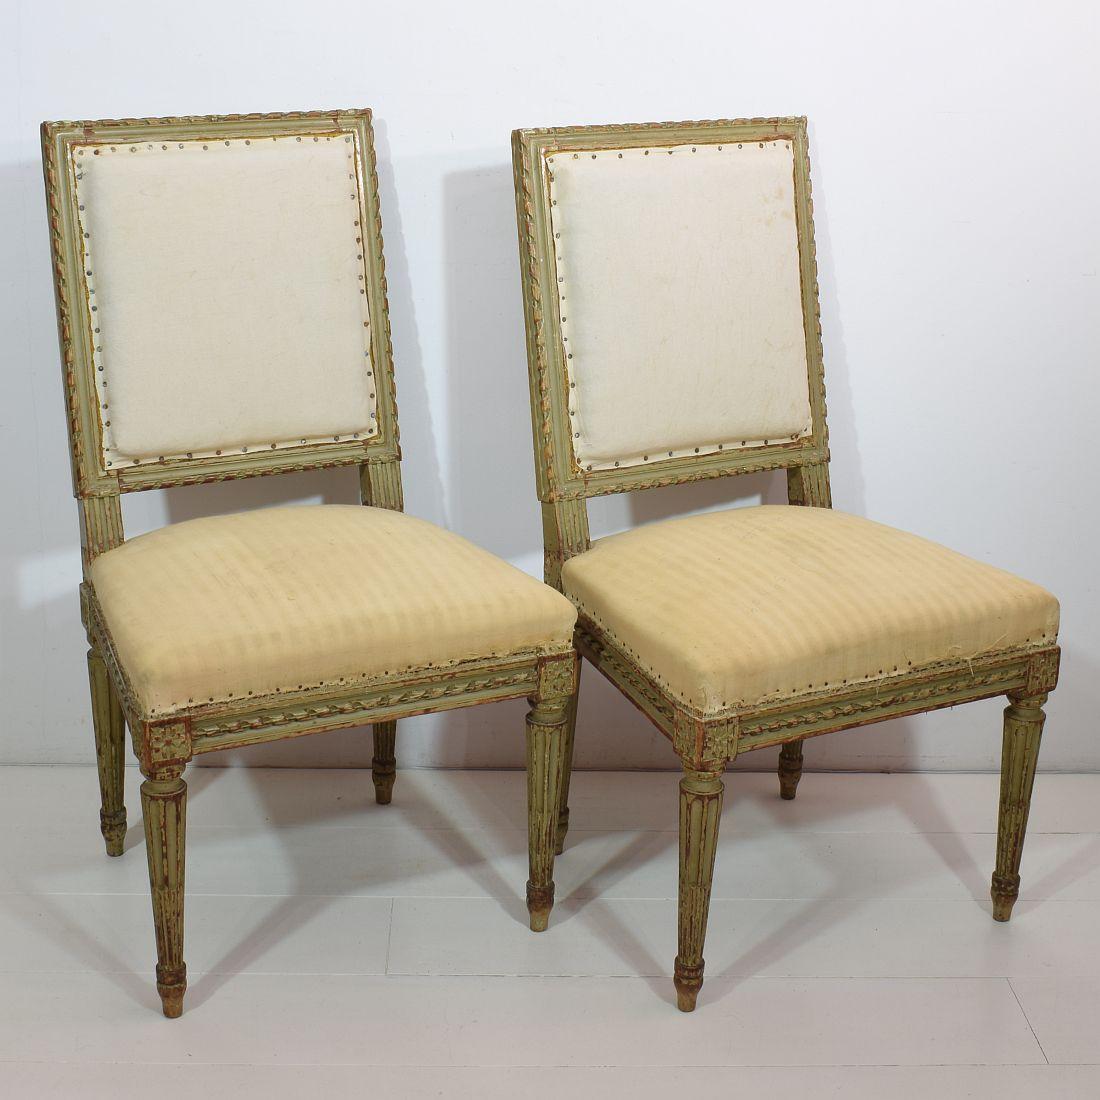 Stunning pair of Louis XVI style side chairs with traces of their original color . France, circa 1850. Weathered, small losses and old repairs. One chair has been repaired, see 2 old screws at the backside. More photo's available on request.